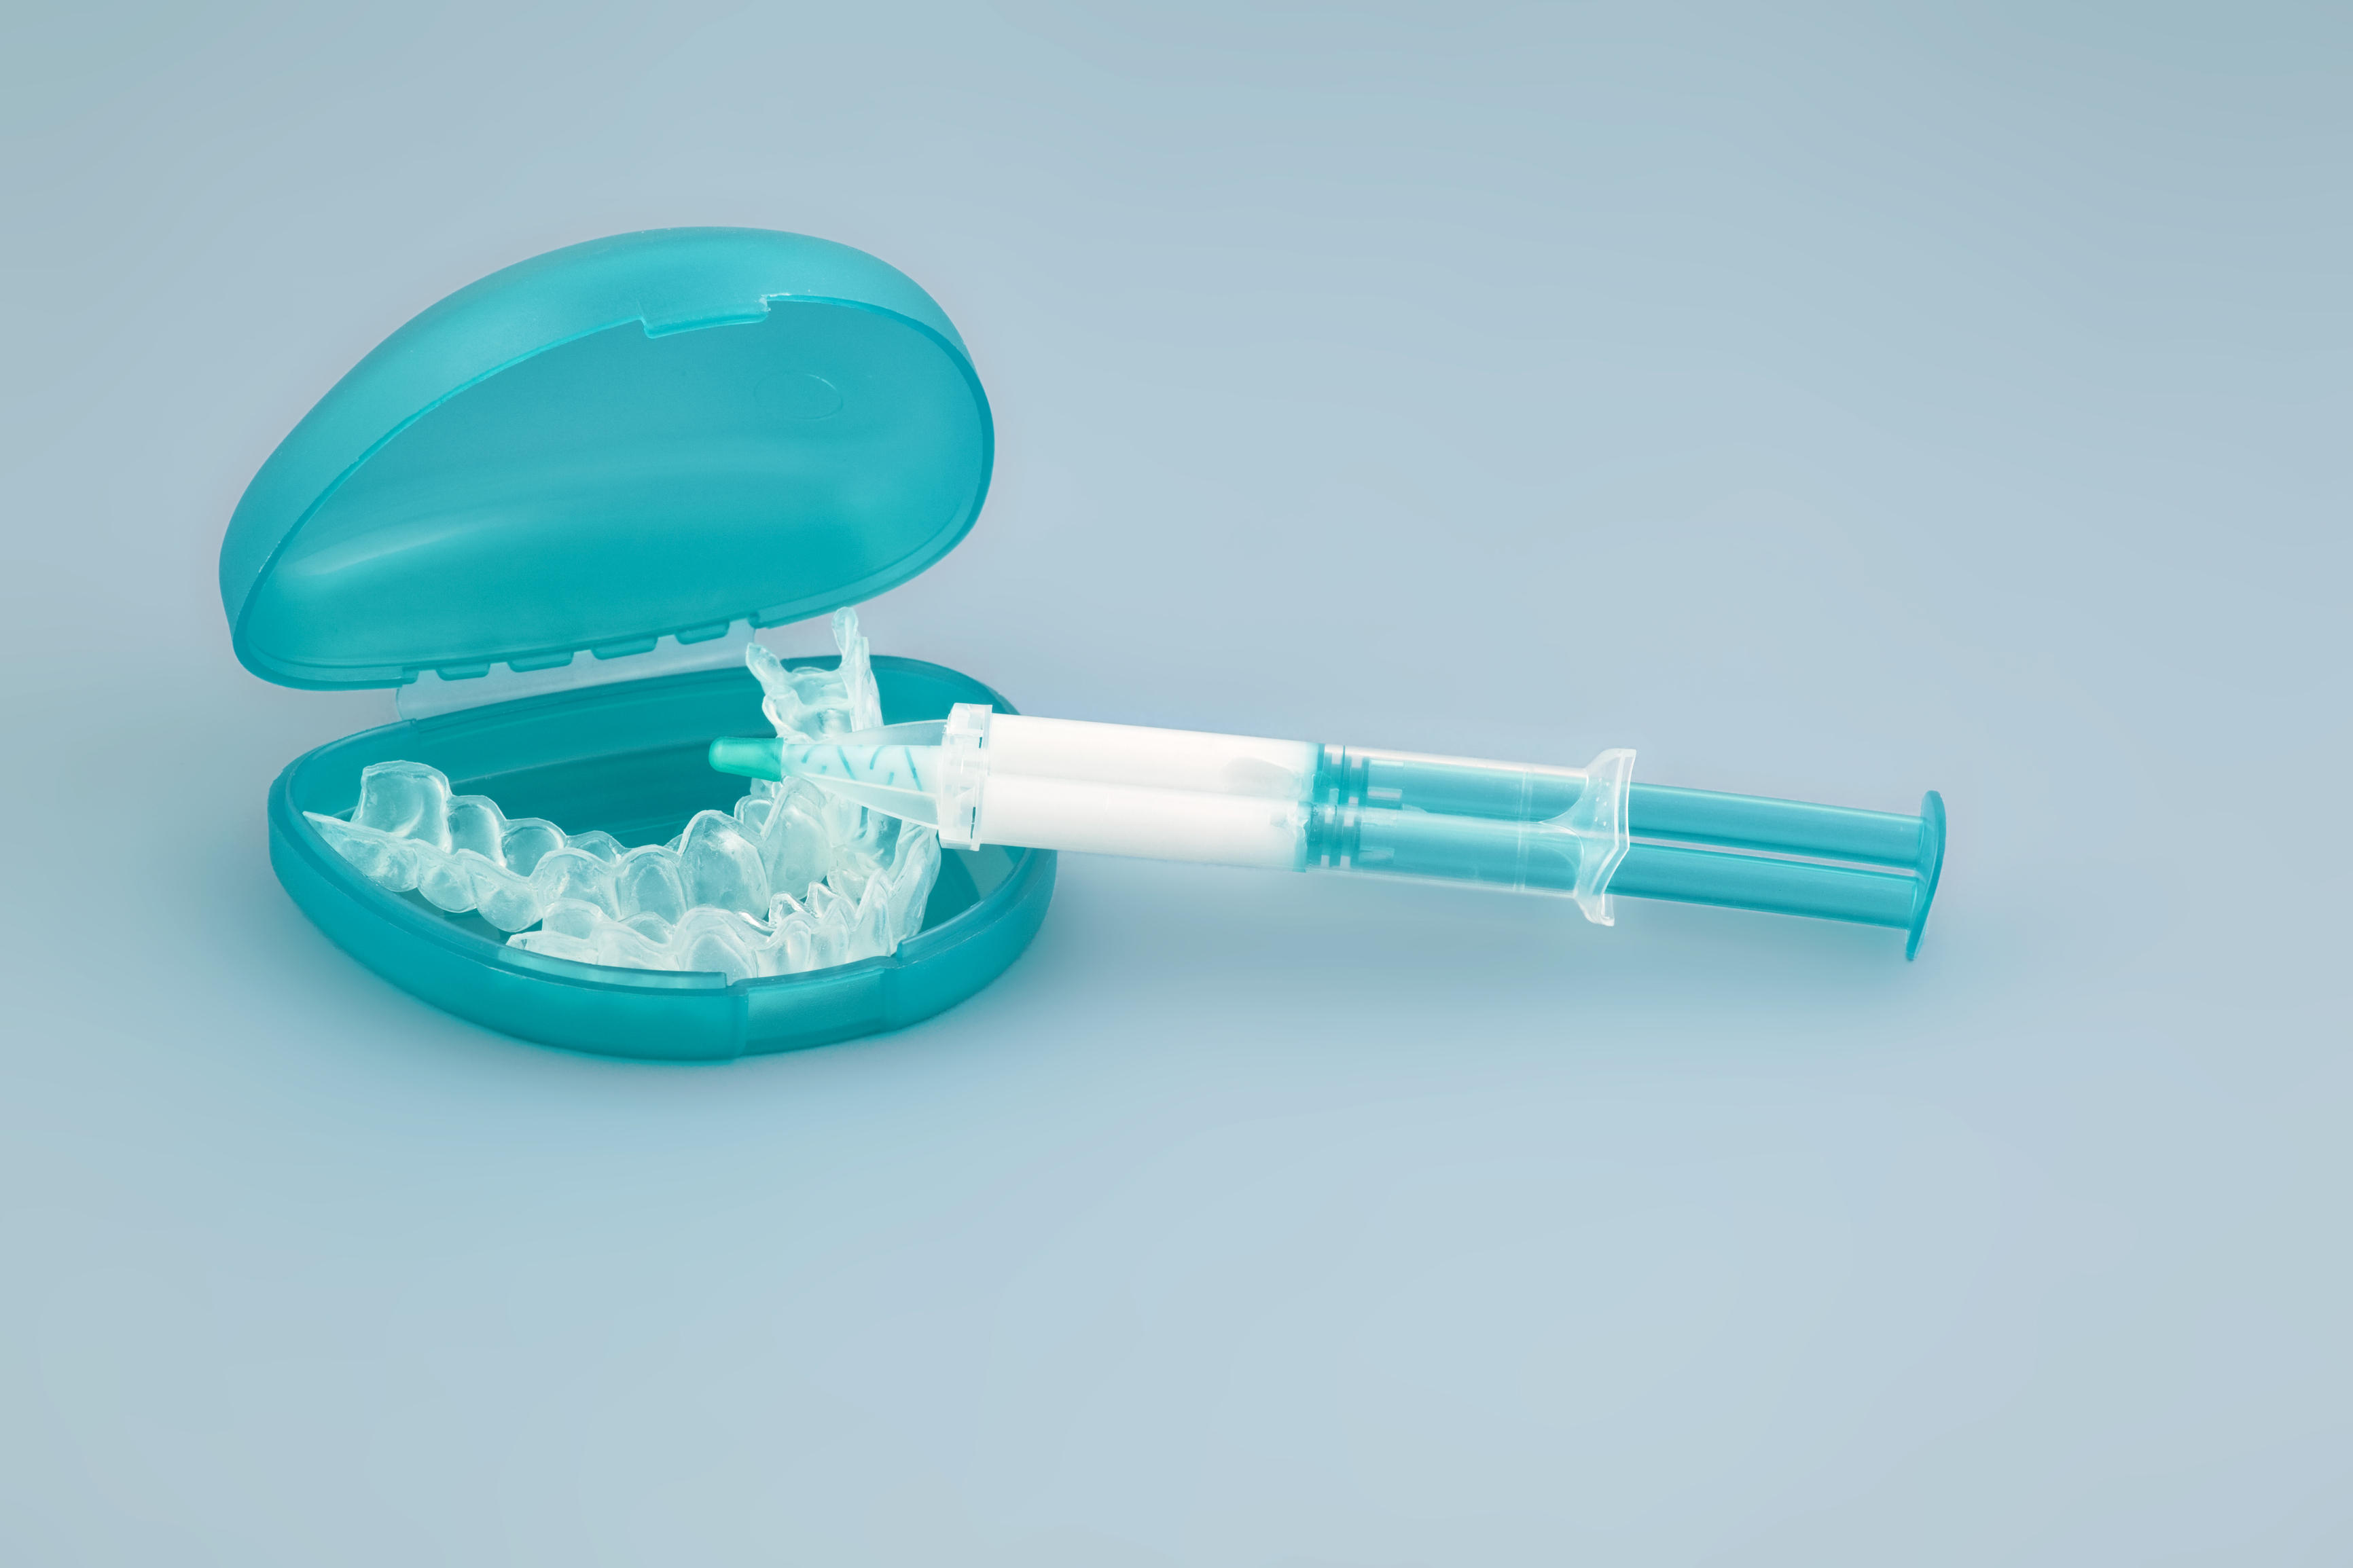 A photo of a teeth whitening mouth tray and product